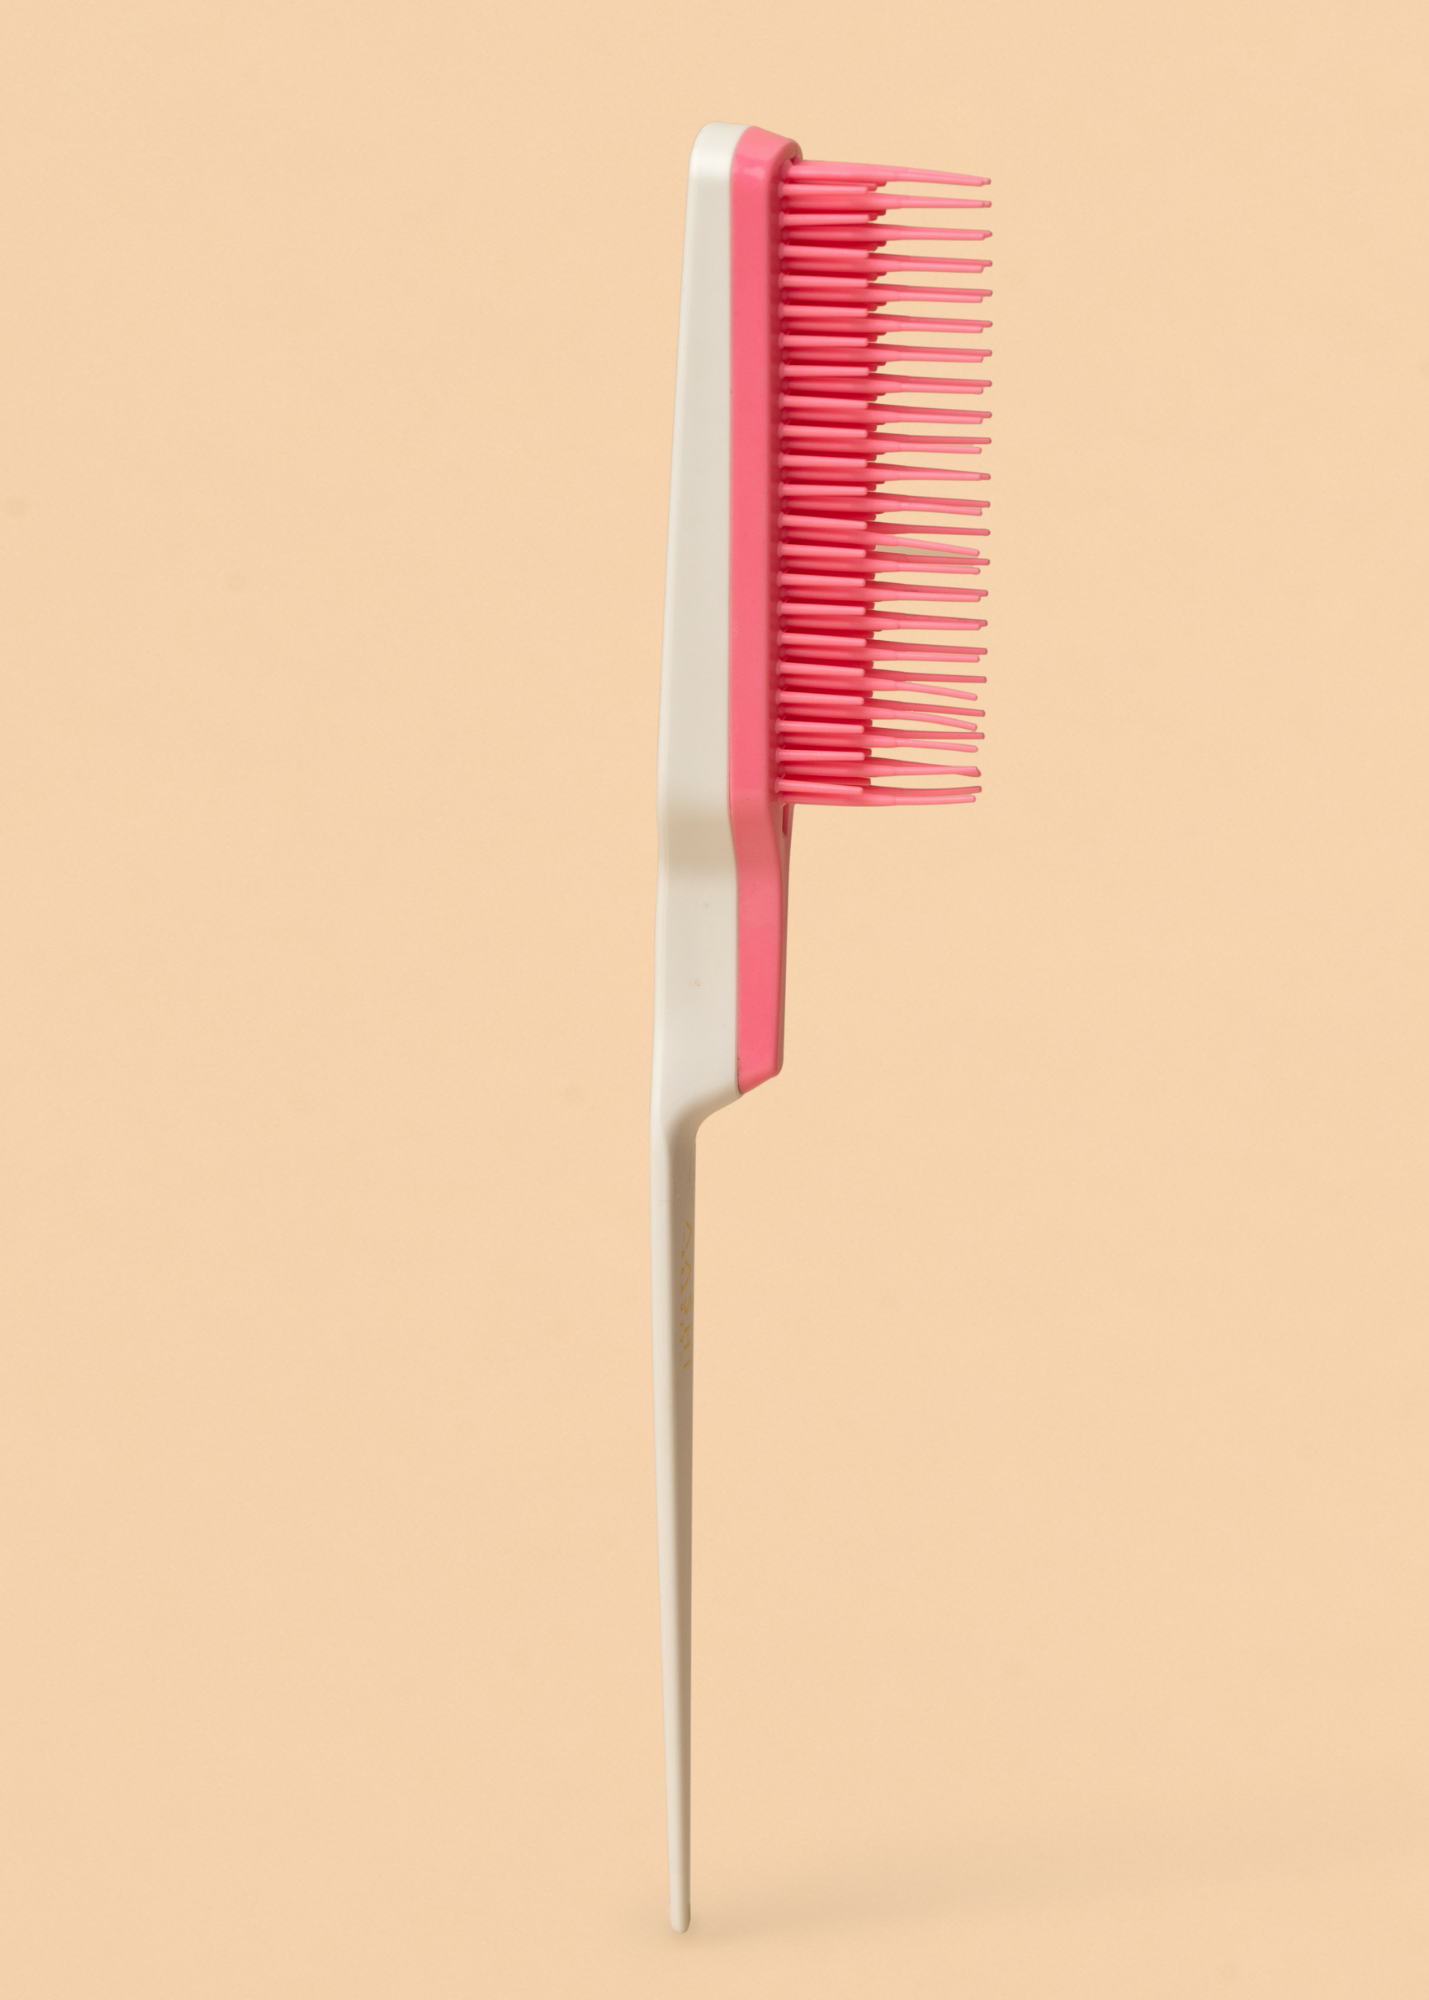 Aashi Beauty Professional Pink Teasing/Comb Series.  Wide-Tooth Detangling Comb,  Parting Teasing Comb, Triple Threat Teasing Comb, Duo Teaser Hair Brush